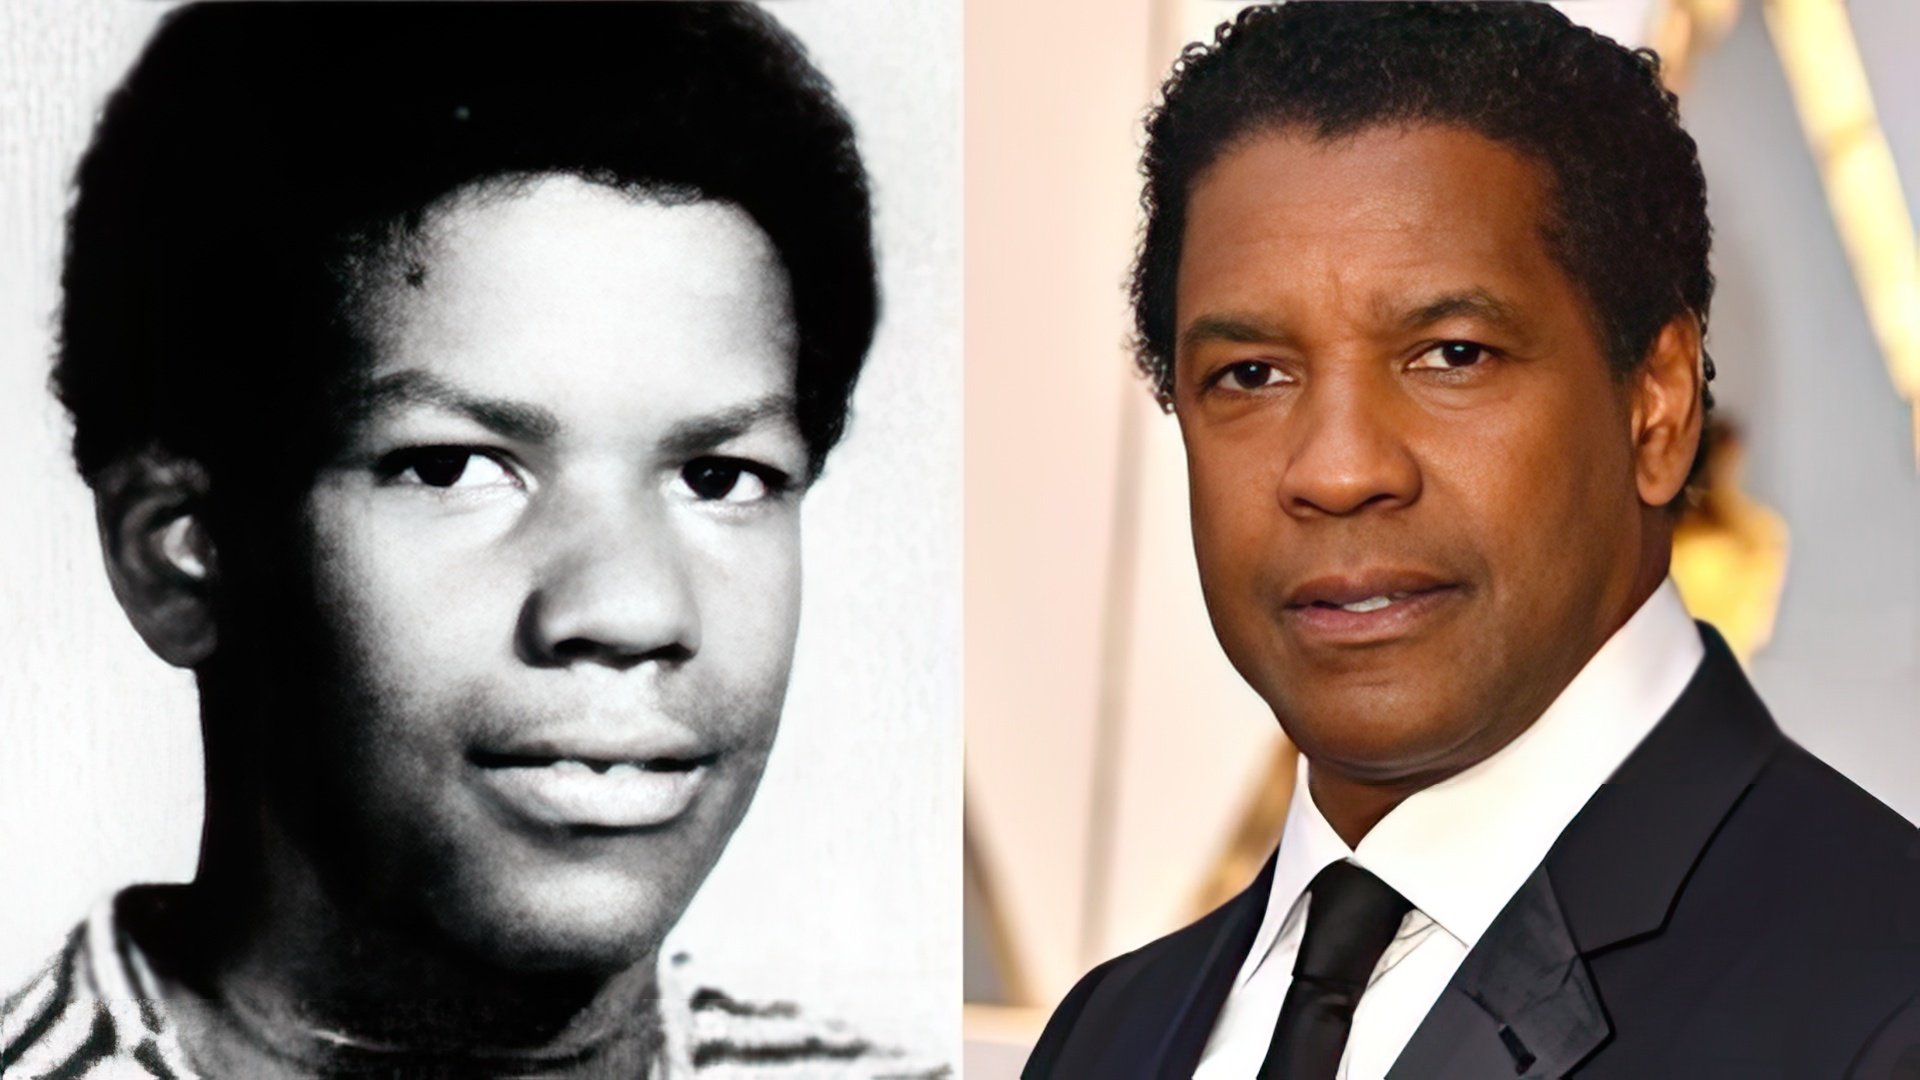 Denzel Washington in his childhood and now